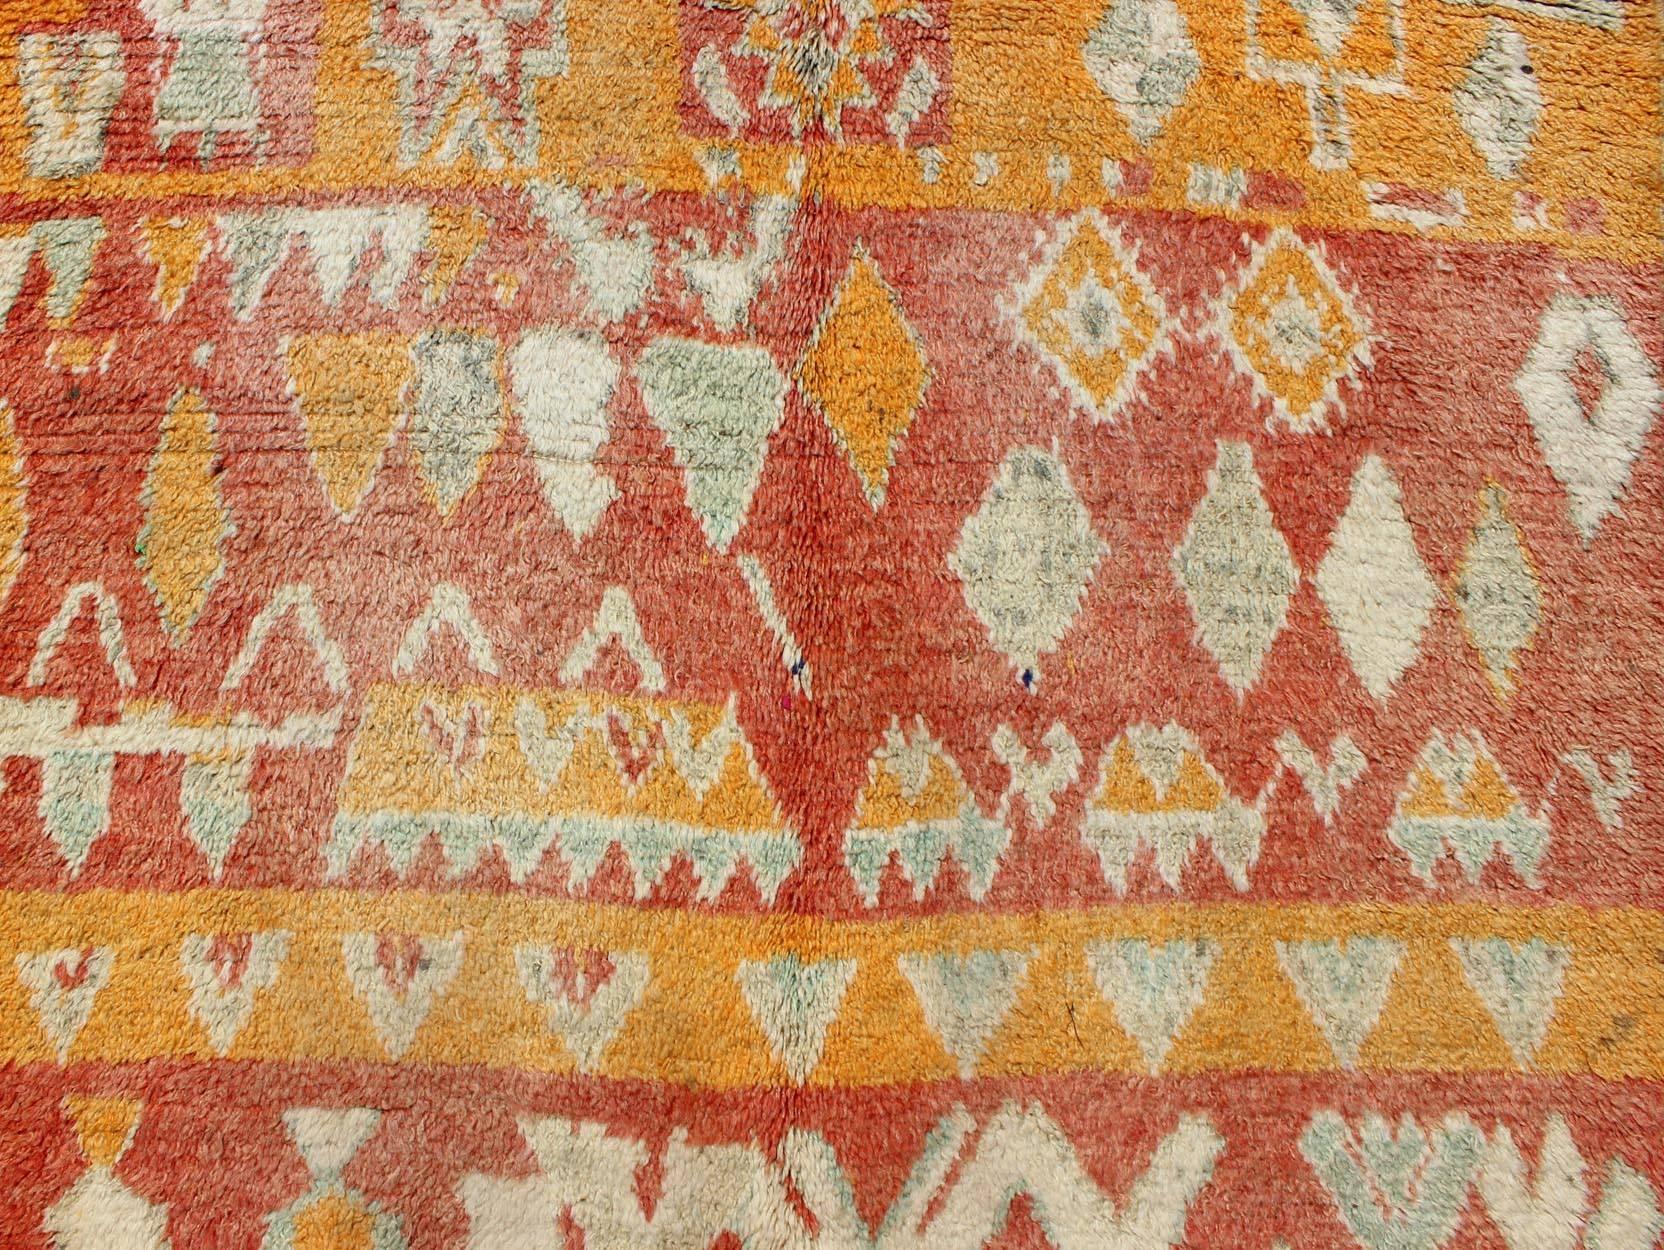 Tribal Design Vintage Moroccan Rug in Orange, Red, Mint Green and Ivory For Sale 5